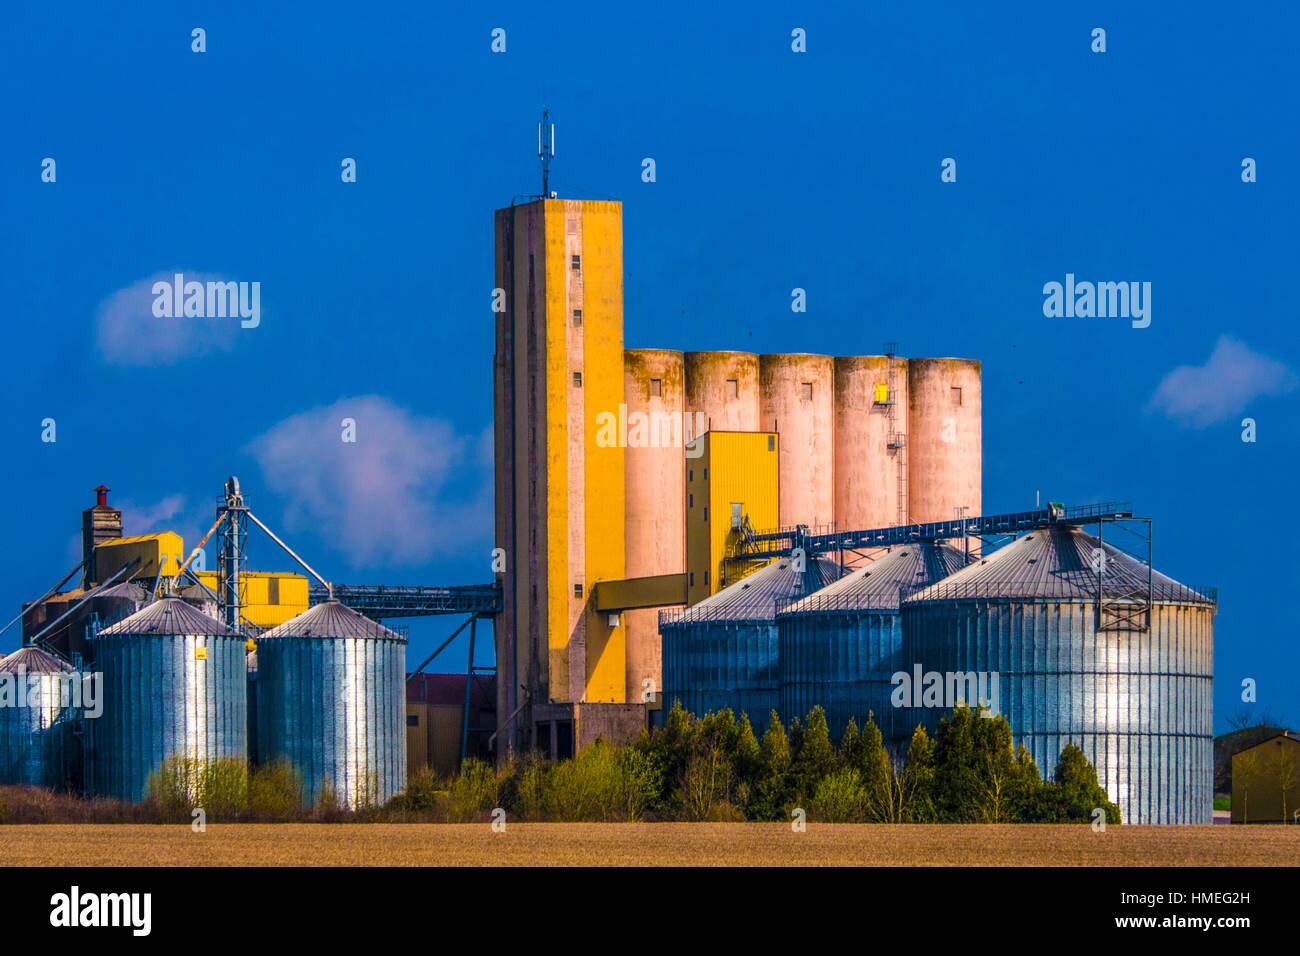 Silo at Fére Champenoise, Marne, Grand Est, France Stock Photo